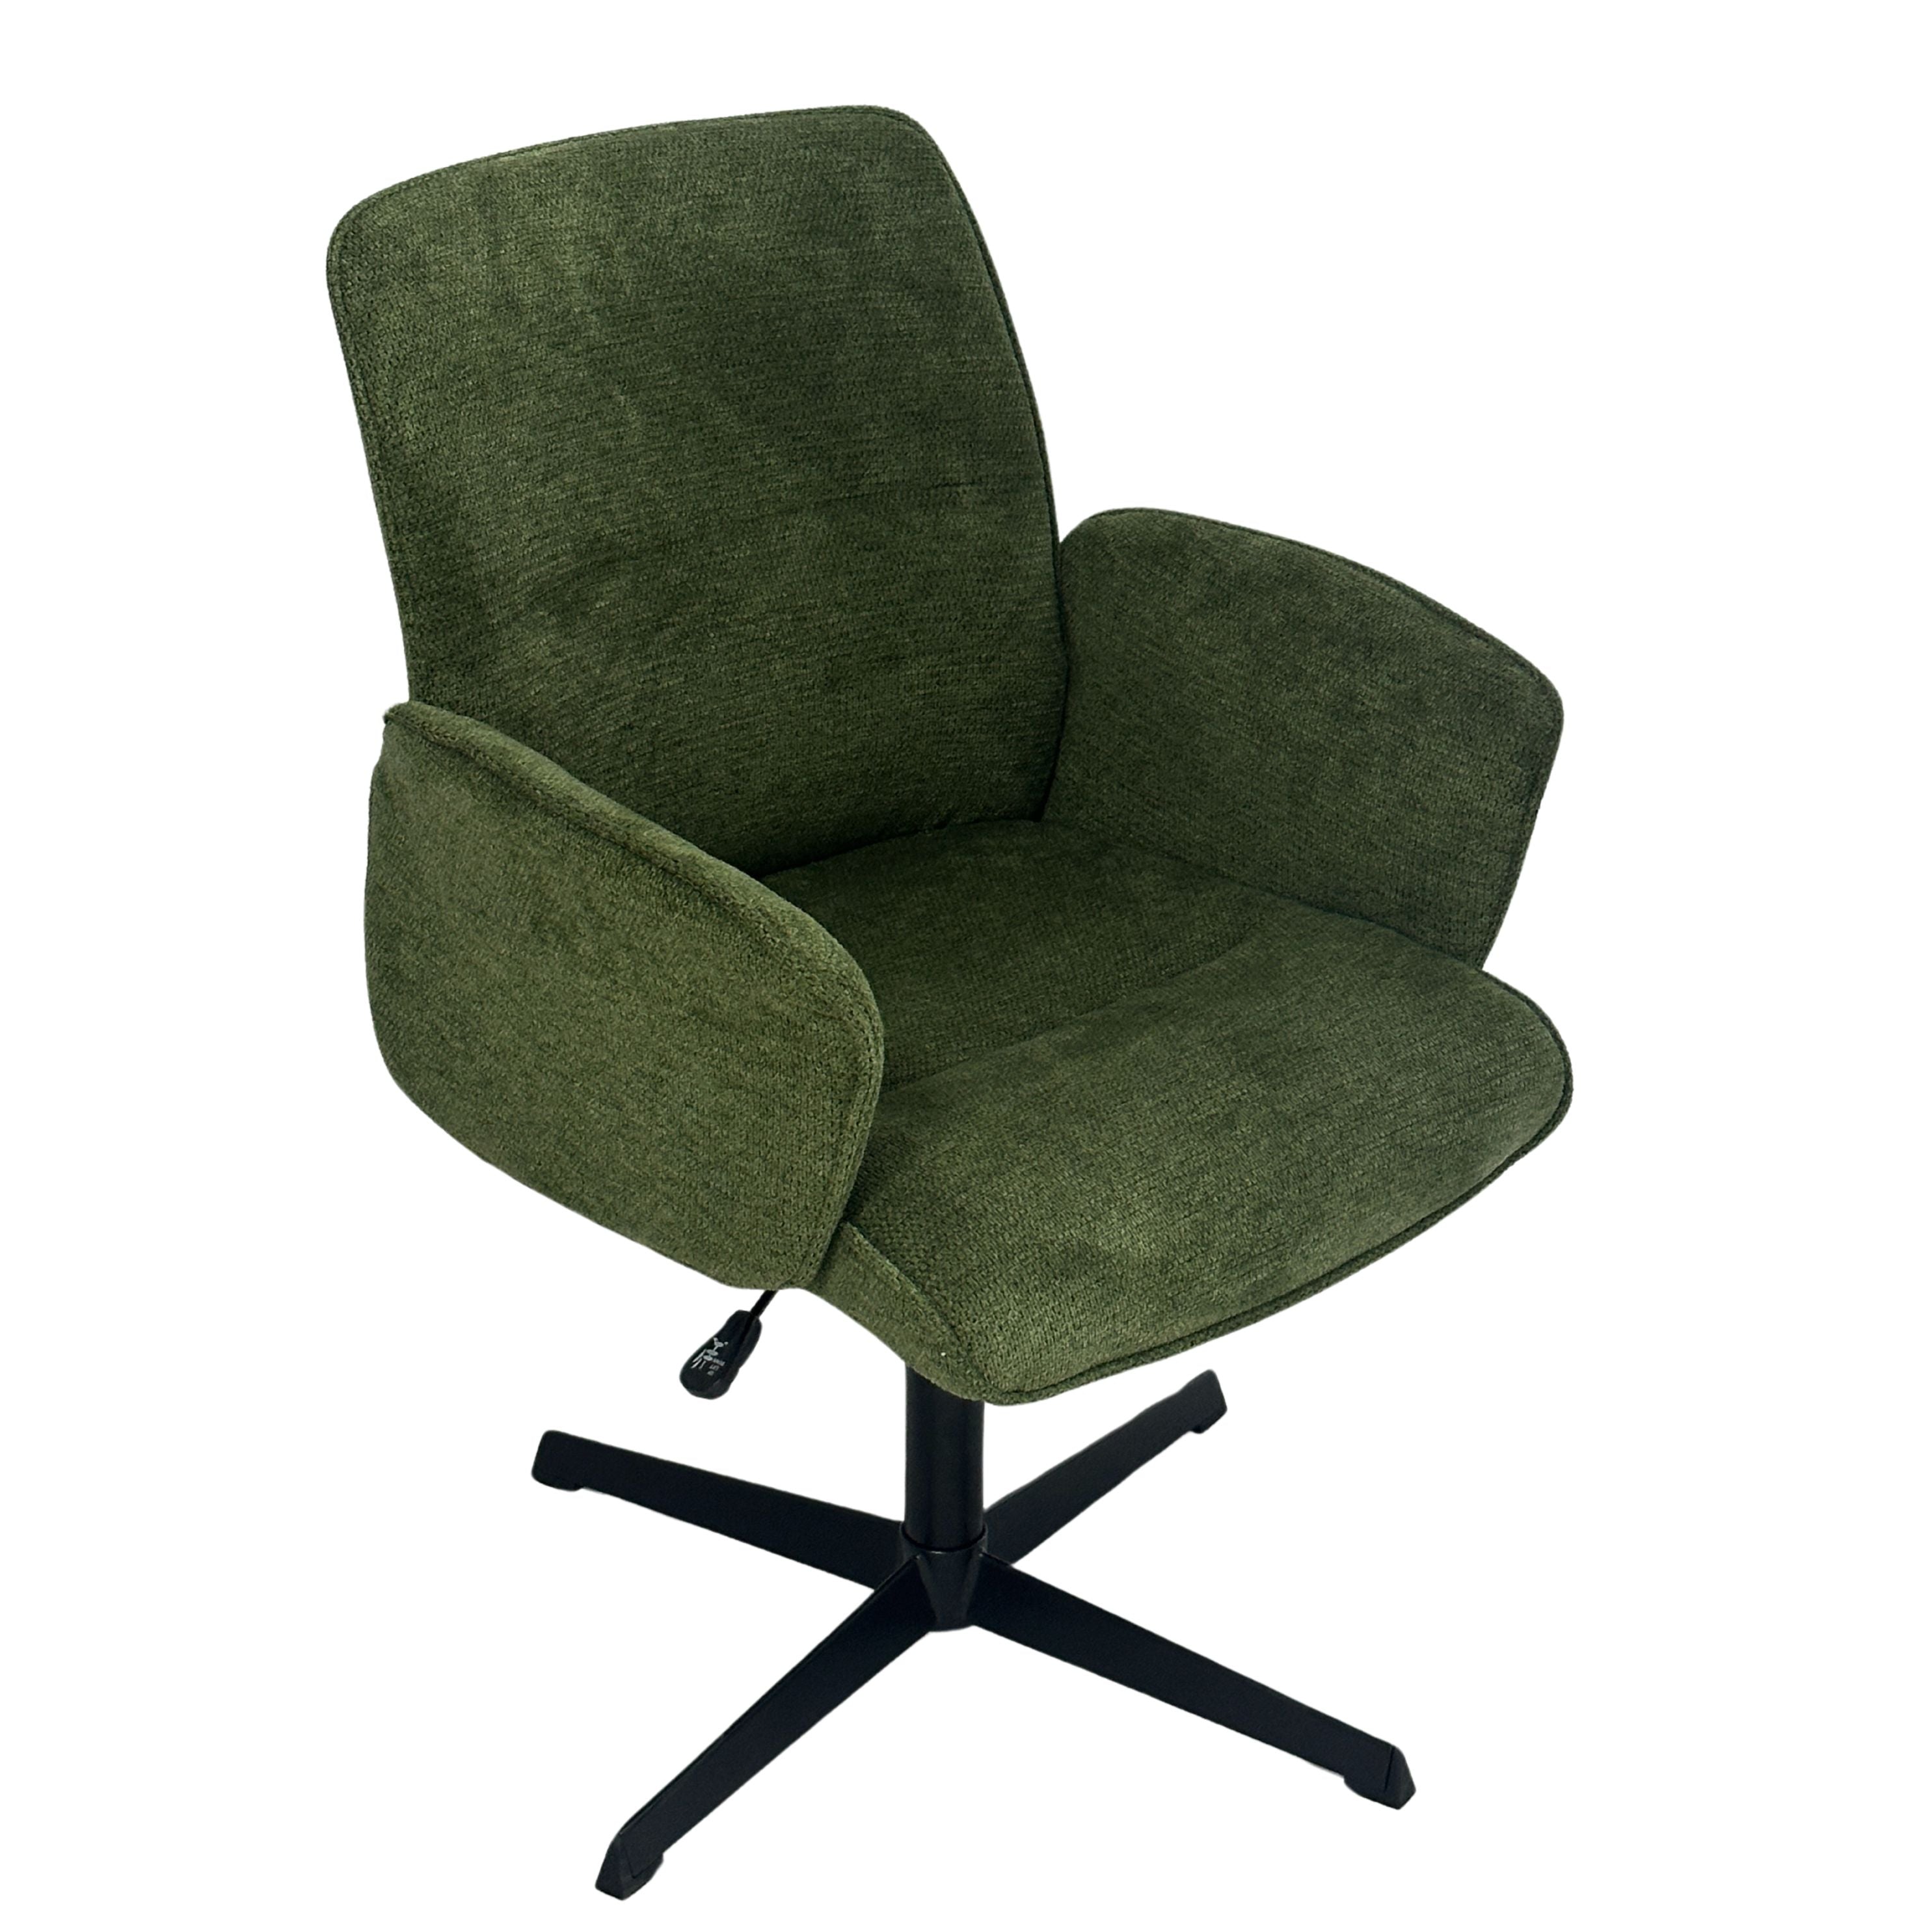 Thomasina Relax Green Accent Chairs